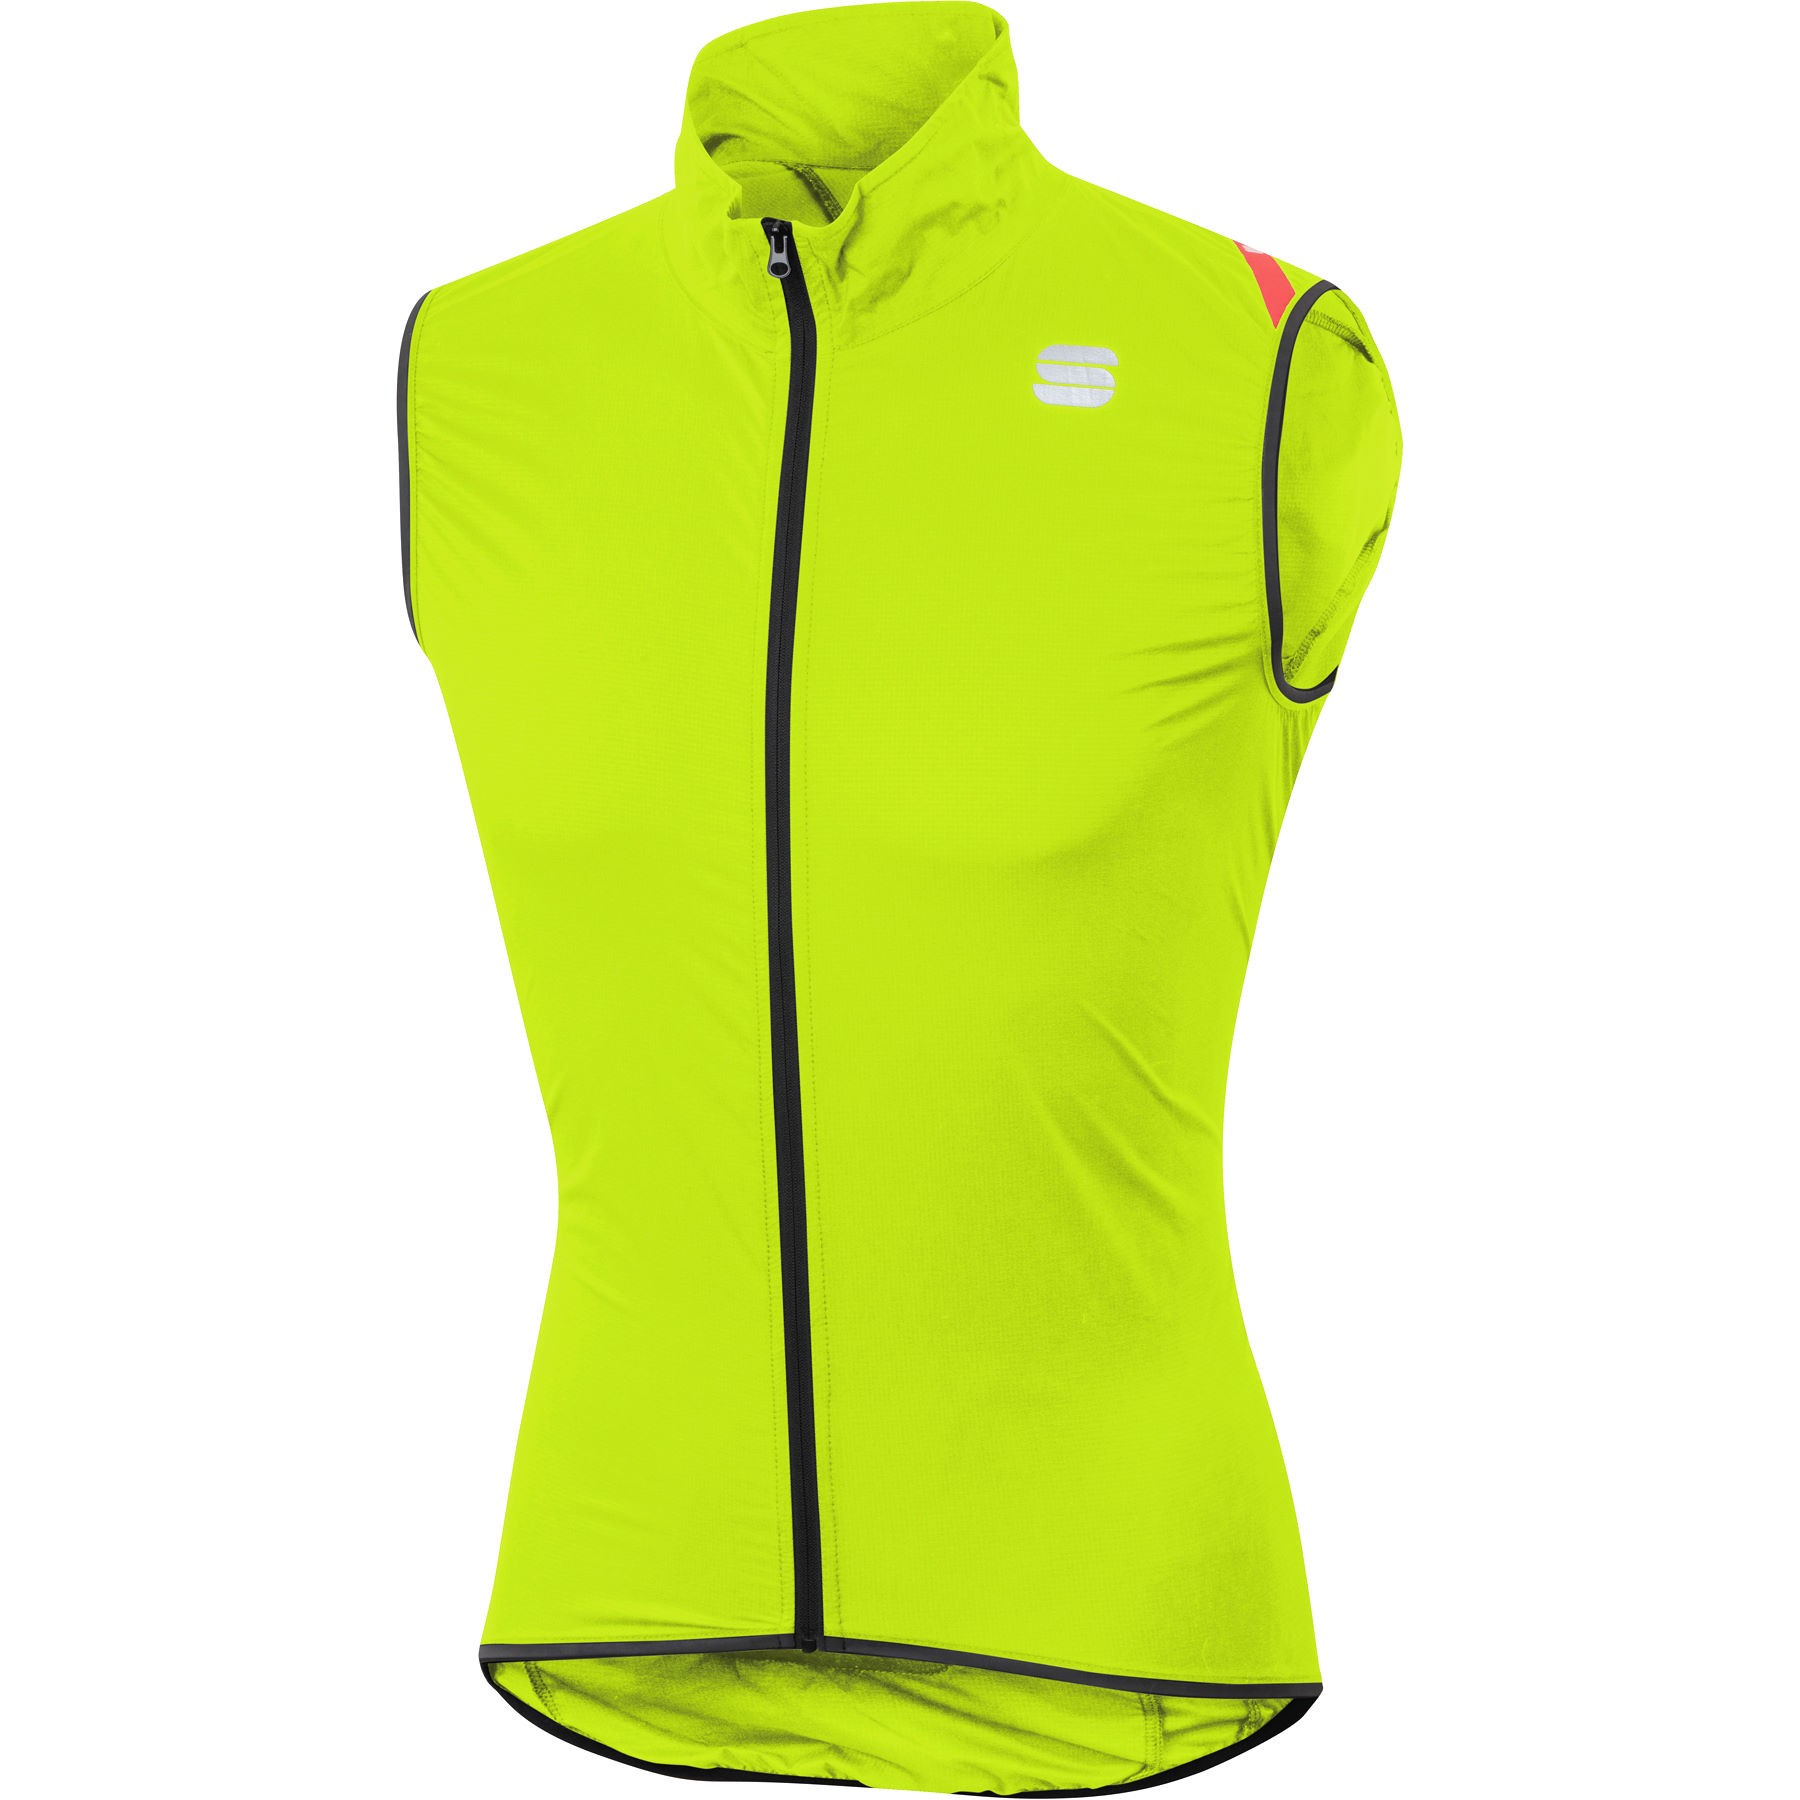 Sportful hot pack 6 gilet coupe-vent fluo jaune